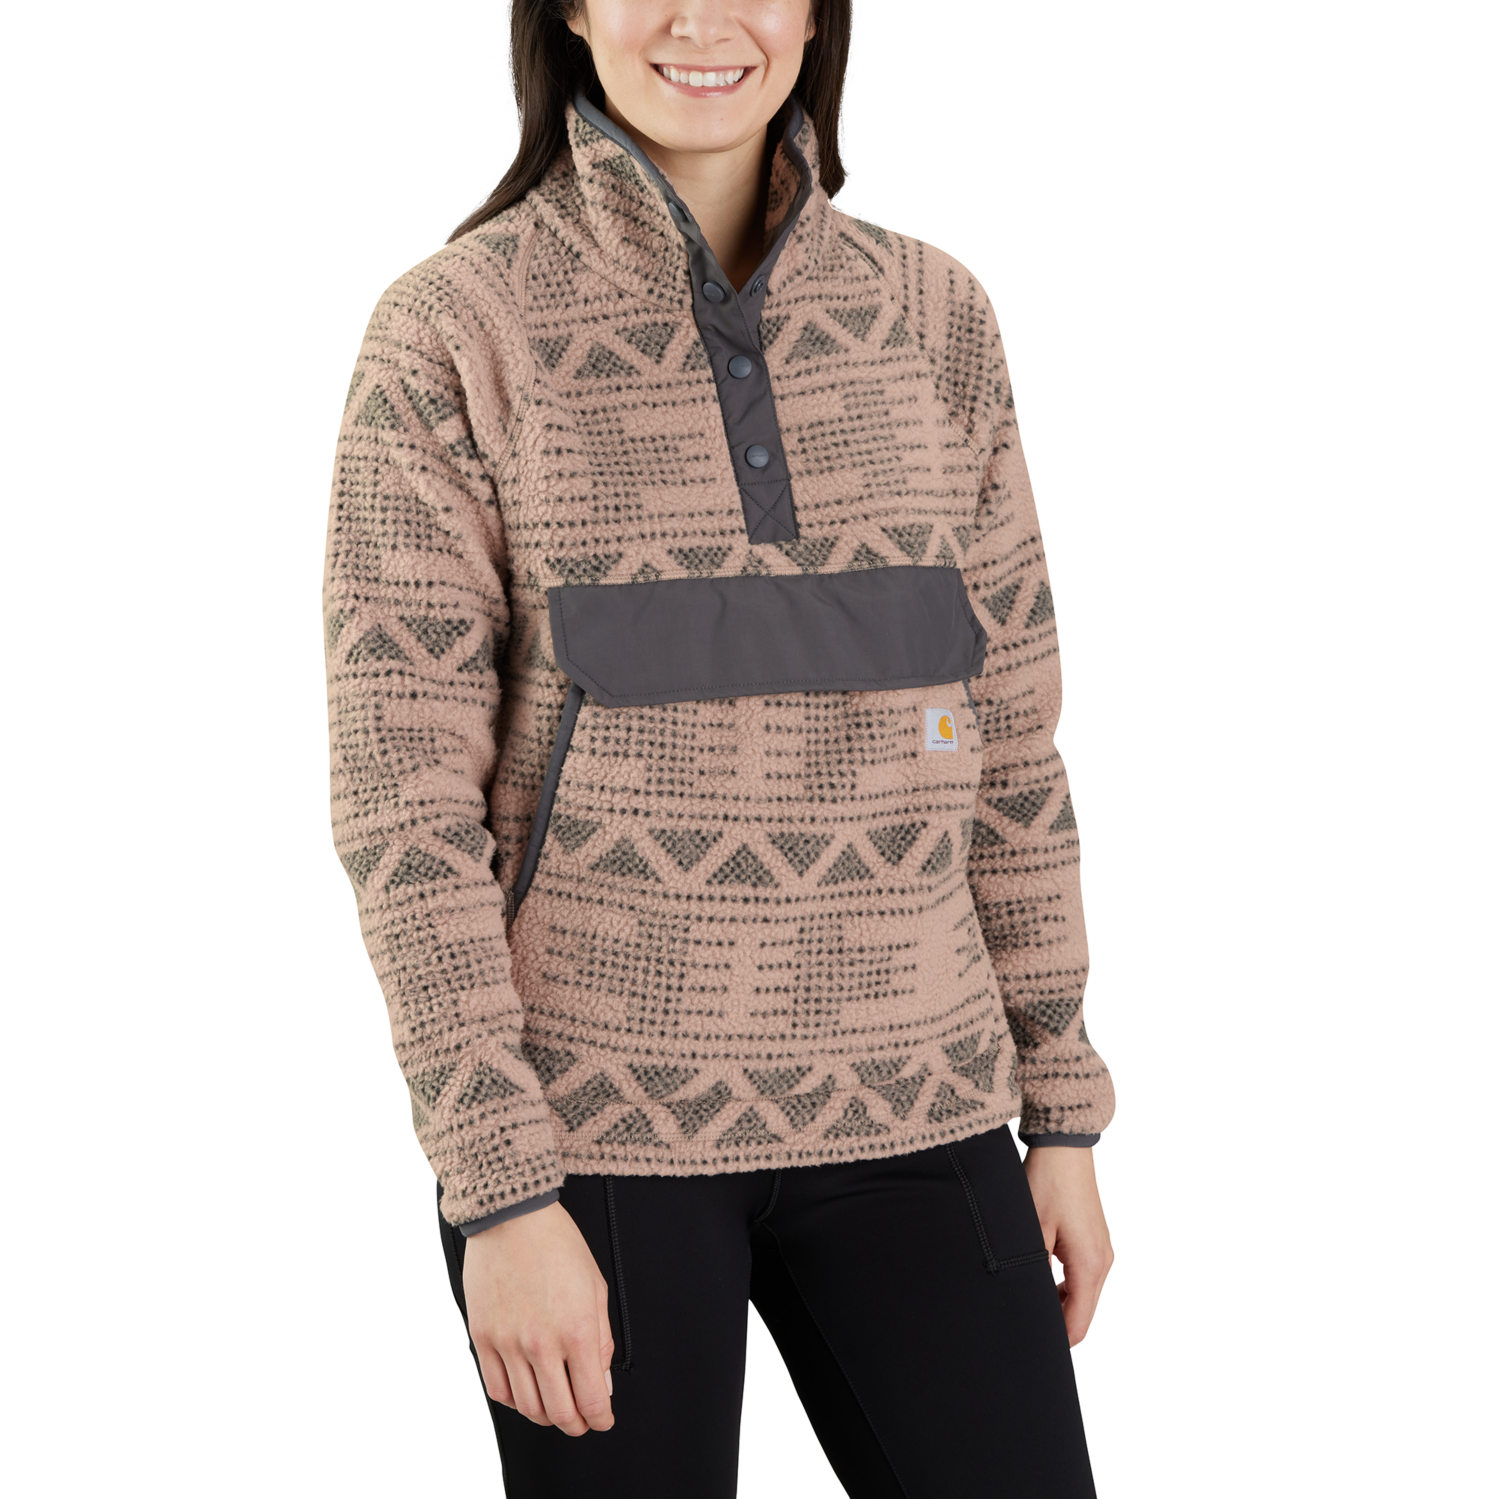 RELAXED_FIT_FLEECE_PULLOVER_LM8Wm7kIjw